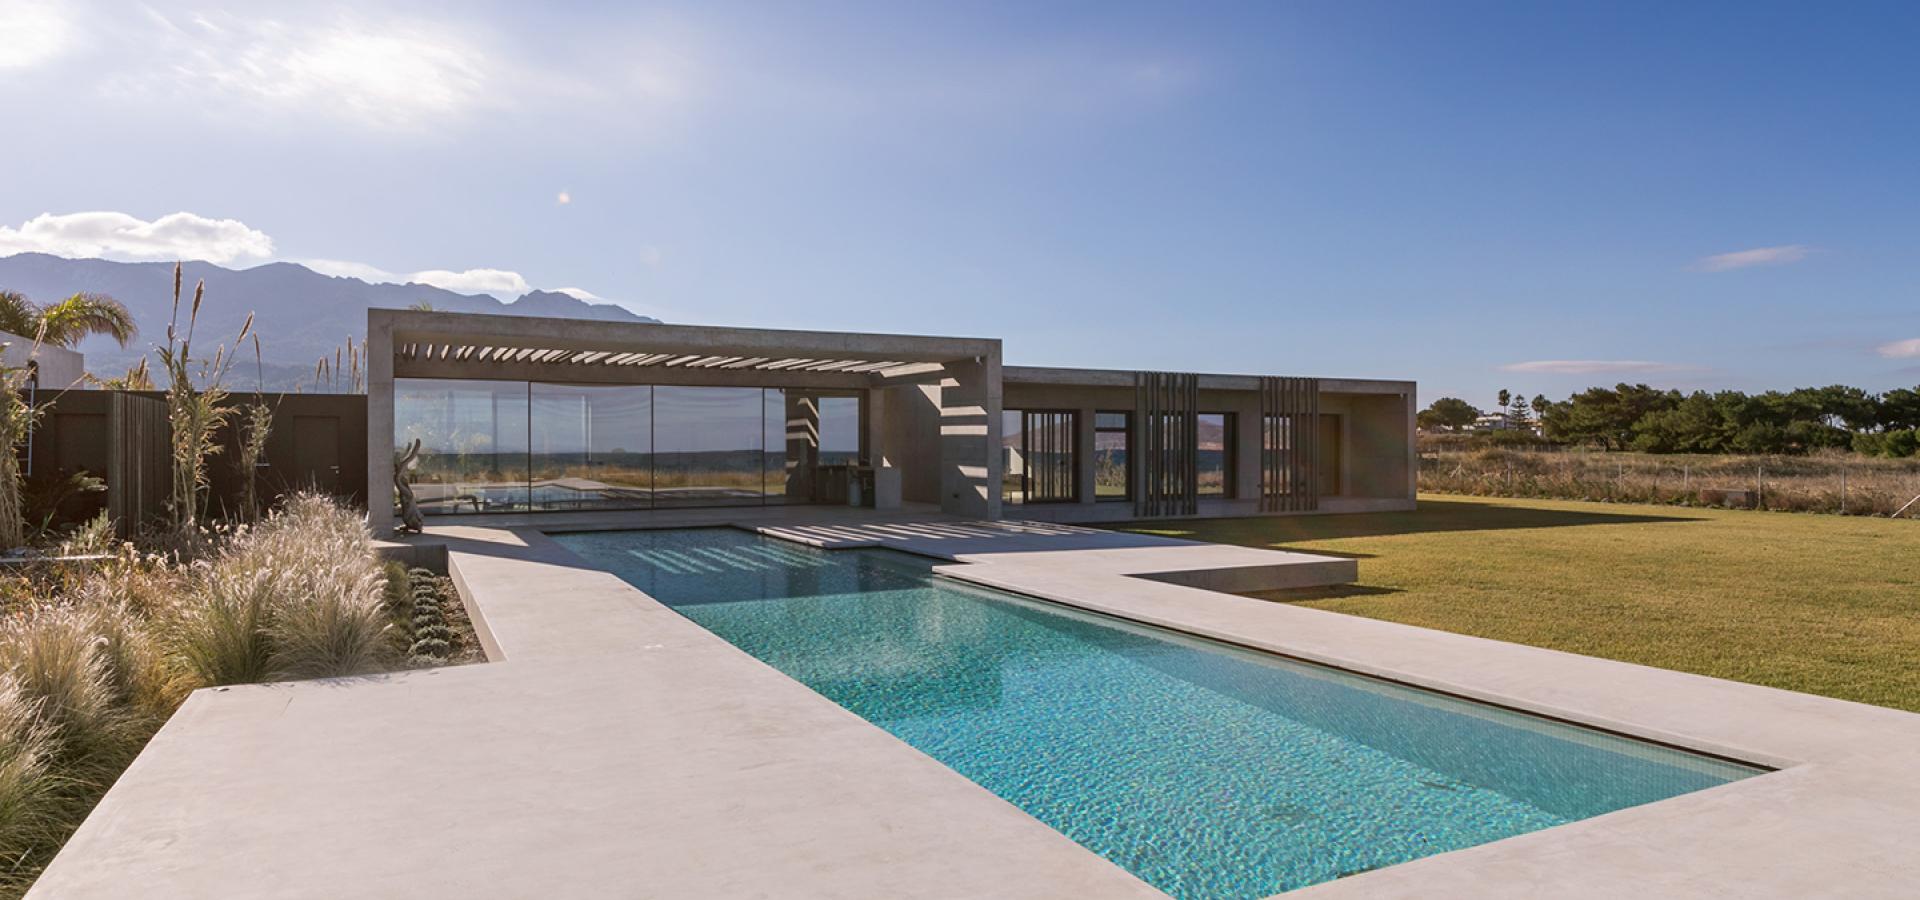 villa and pool area at daytime